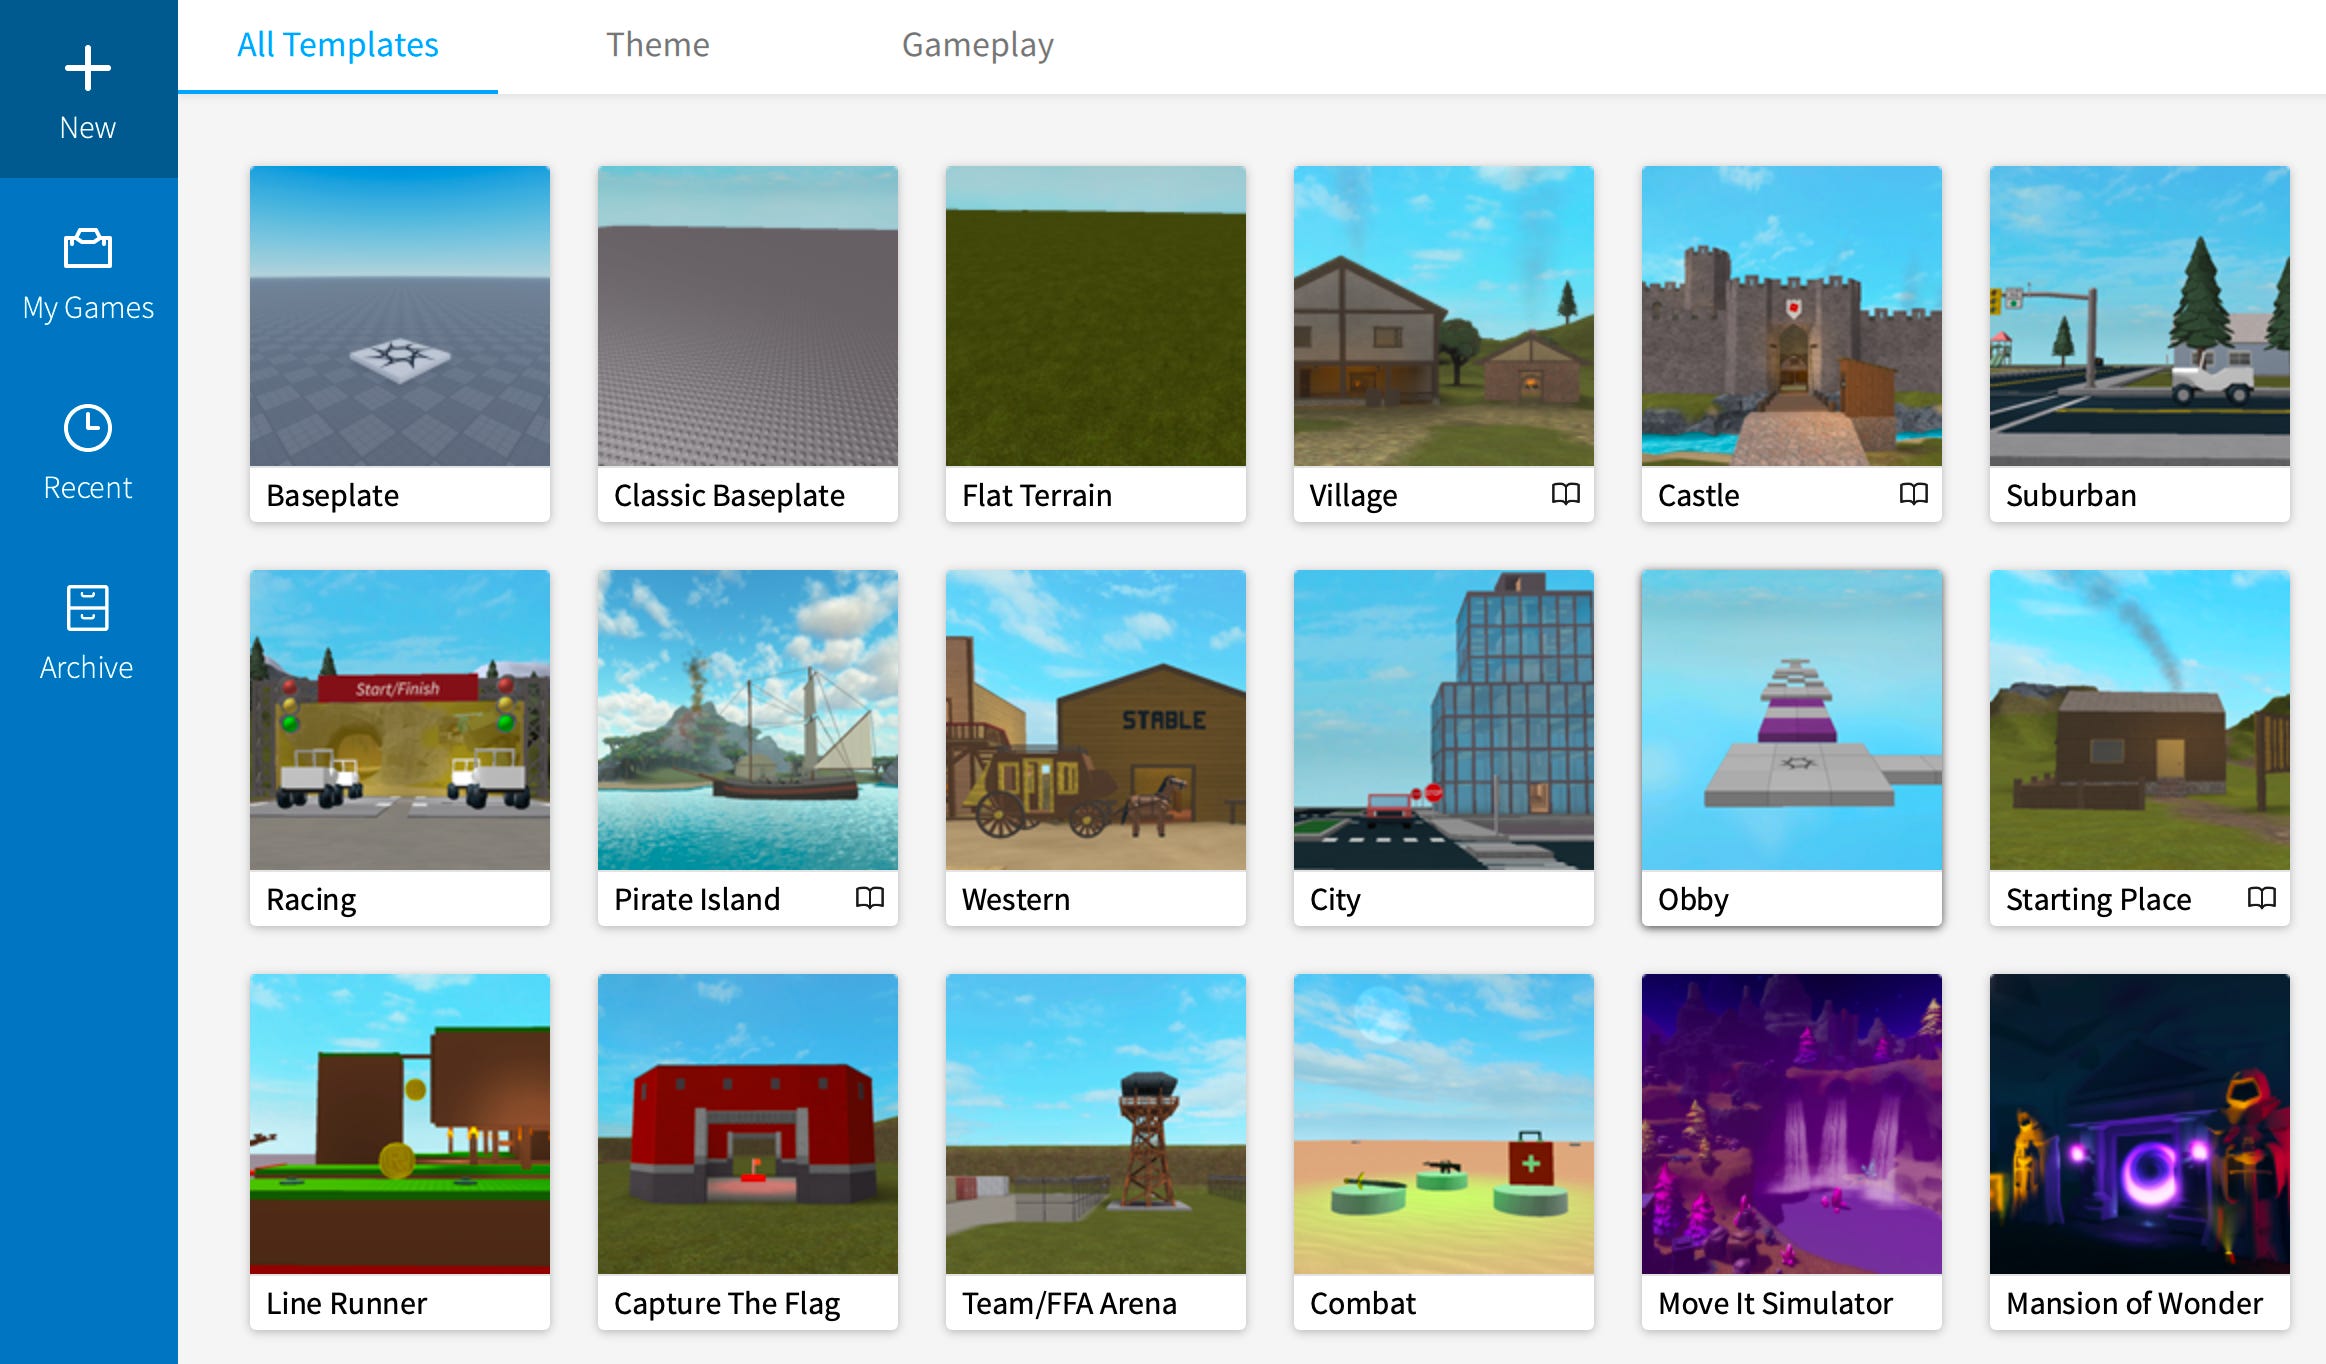 reviired is one of the millions playing, creating and exploring the endless  possibilities of Roblox. Join revii…